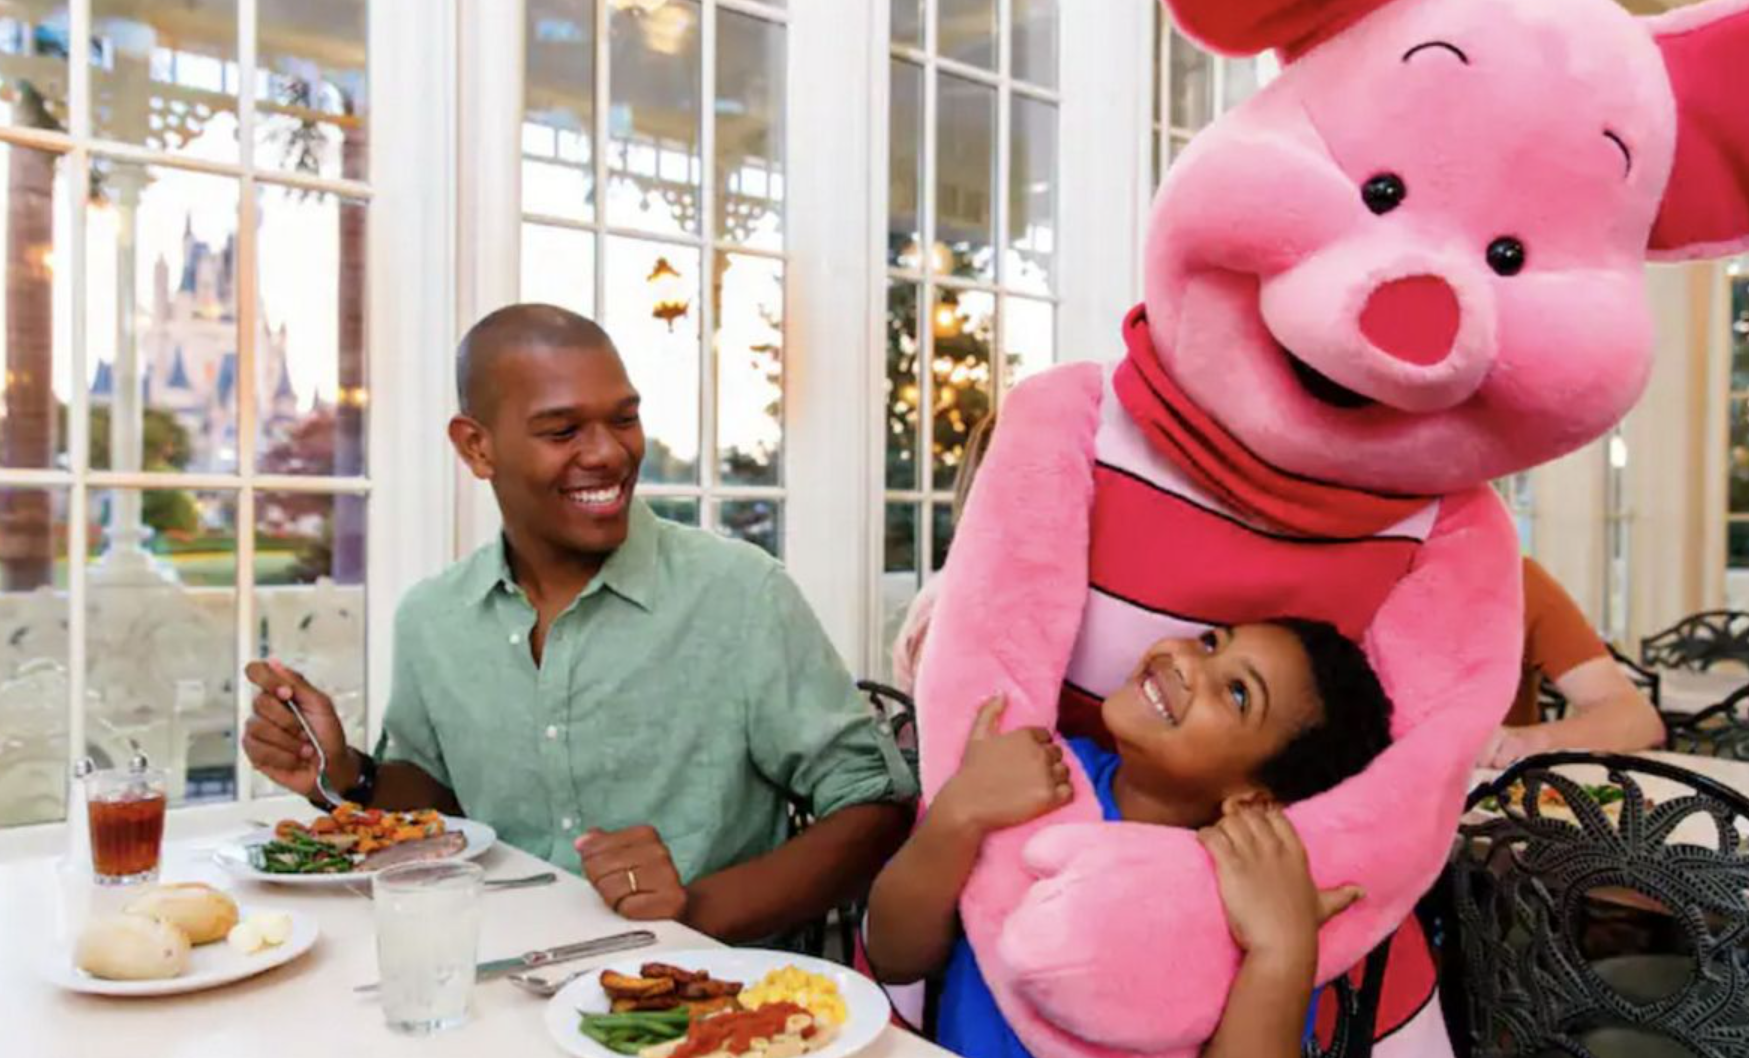 https://mickeyblog.com/wp-content/uploads/2022/09/2022-09-21-16_48_47-n13_disney_world_crystal_palace_character_dining-1280%C3%97720.png